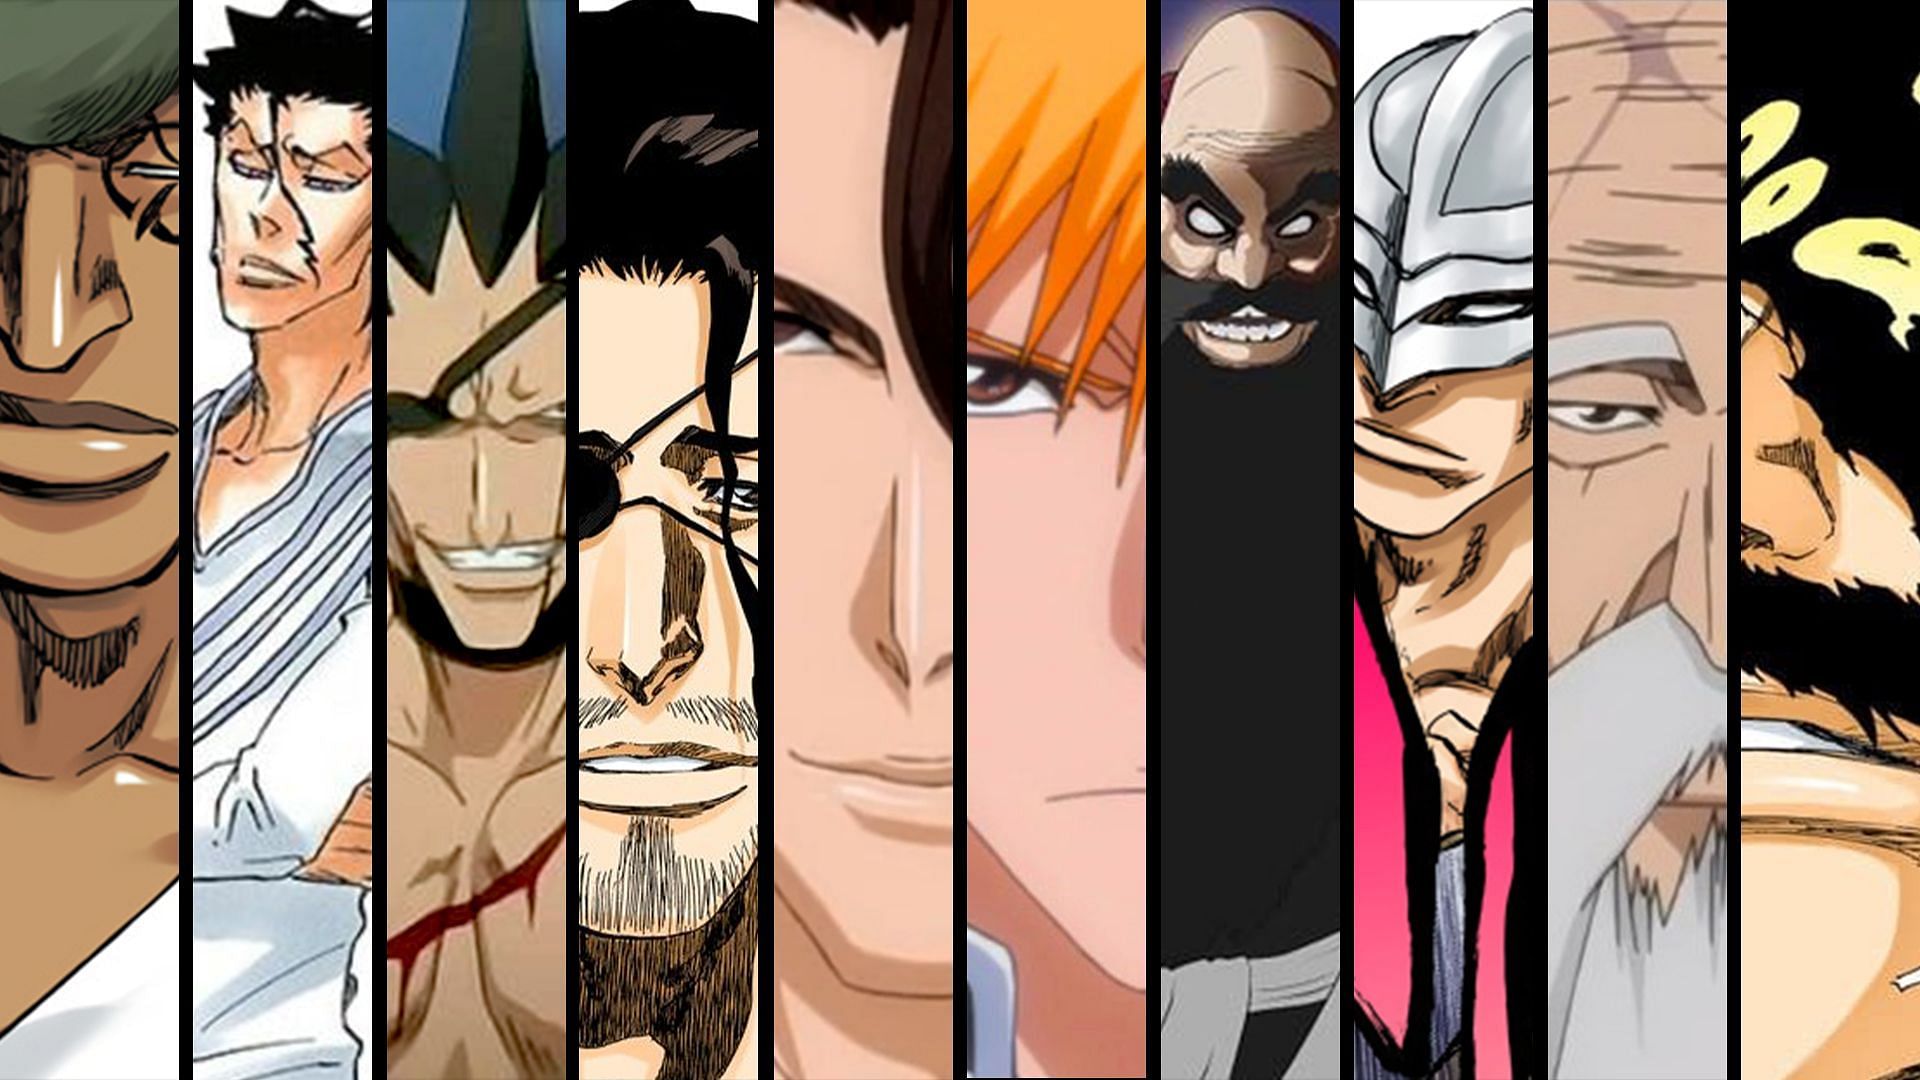 10 characters in Bleach, ranked based on their strength